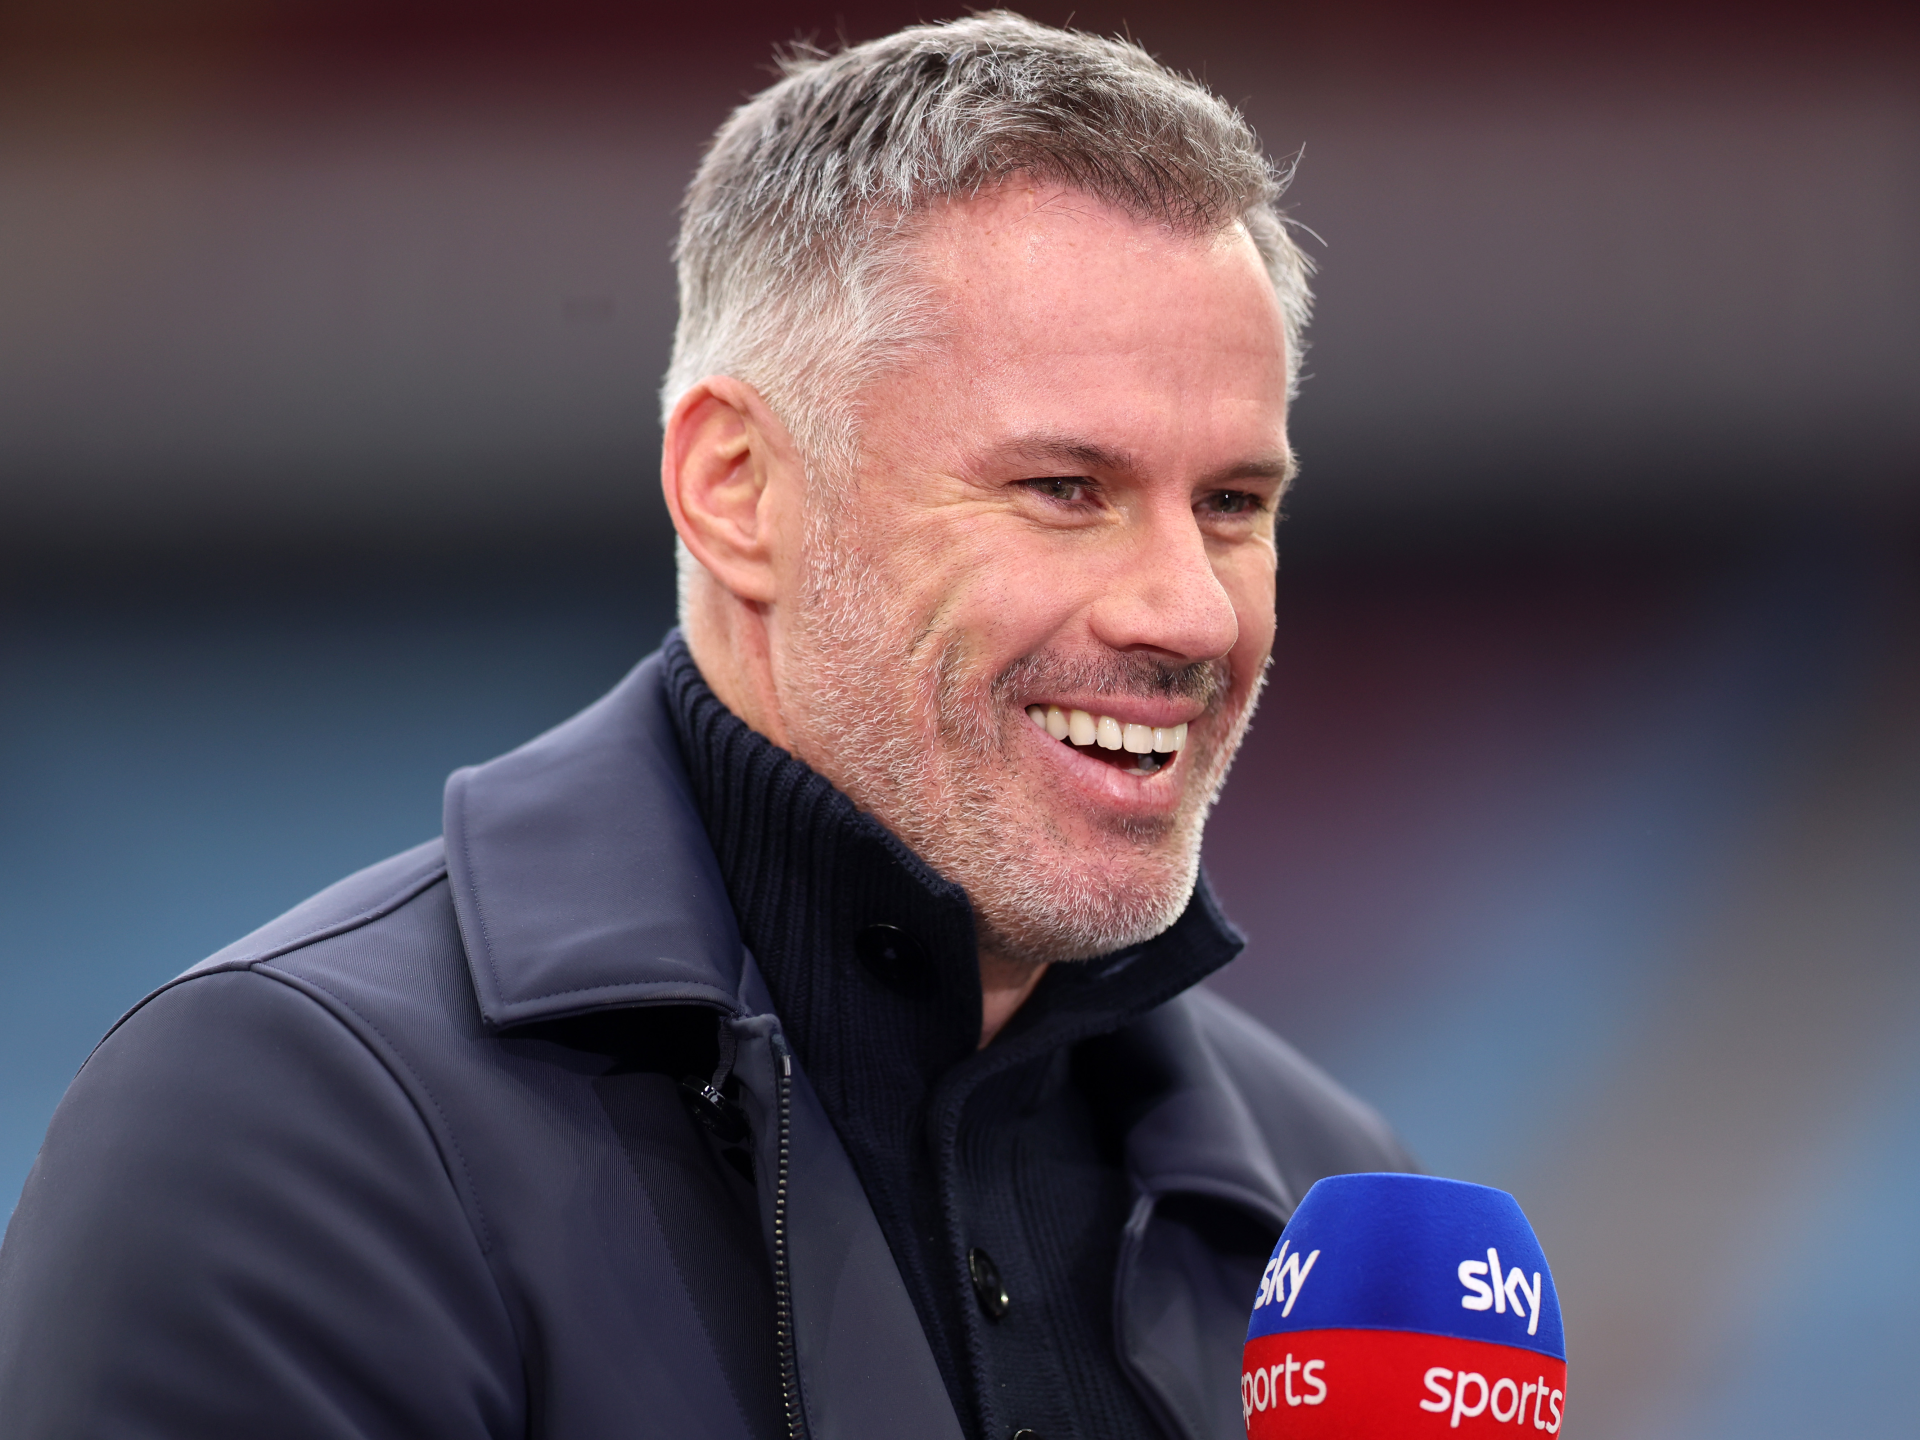 Former Liverpool player Jamie Carragher mocks former United player Gary Neville with ‘billionaire bottle jobs’ remark after crushing Manchester United loss against Chelsea